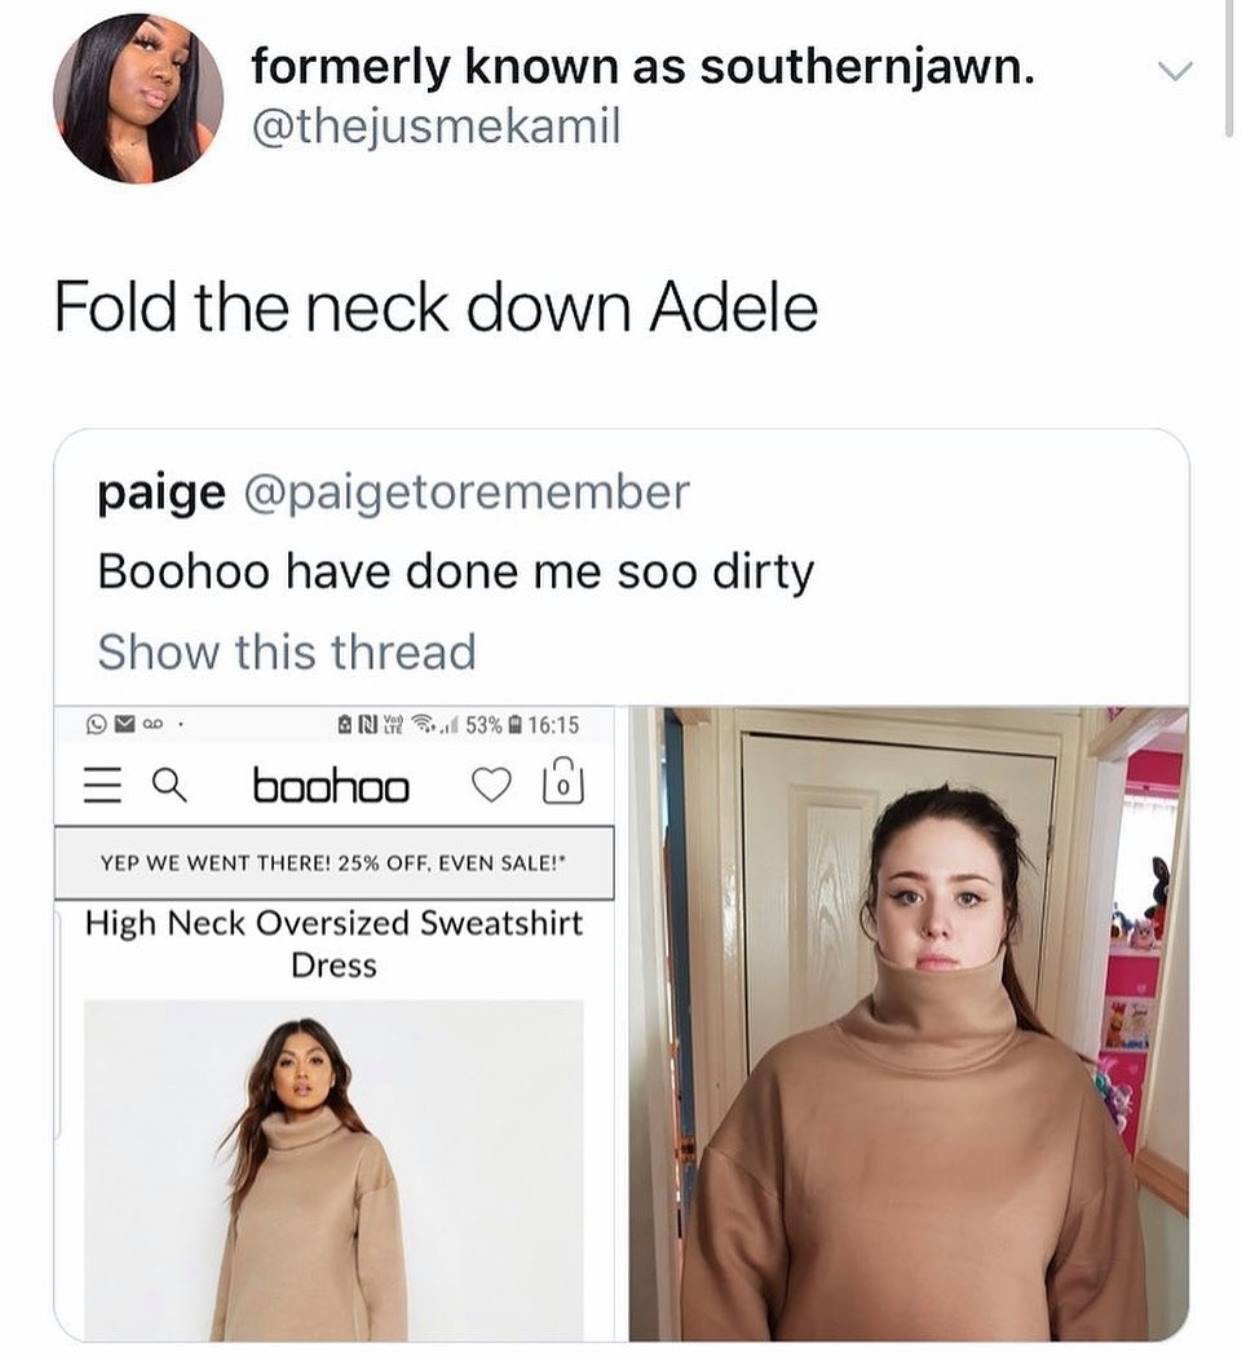 shoulder - formerly known as southernjawn. Fold the neck down Adele paige Boohoo have done me soo dirty Show this thread D. Any Soul 53% a boohoo Yep We Went There! 25% Off. Even Sale!" High Neck Oversized Sweatshirt Dress